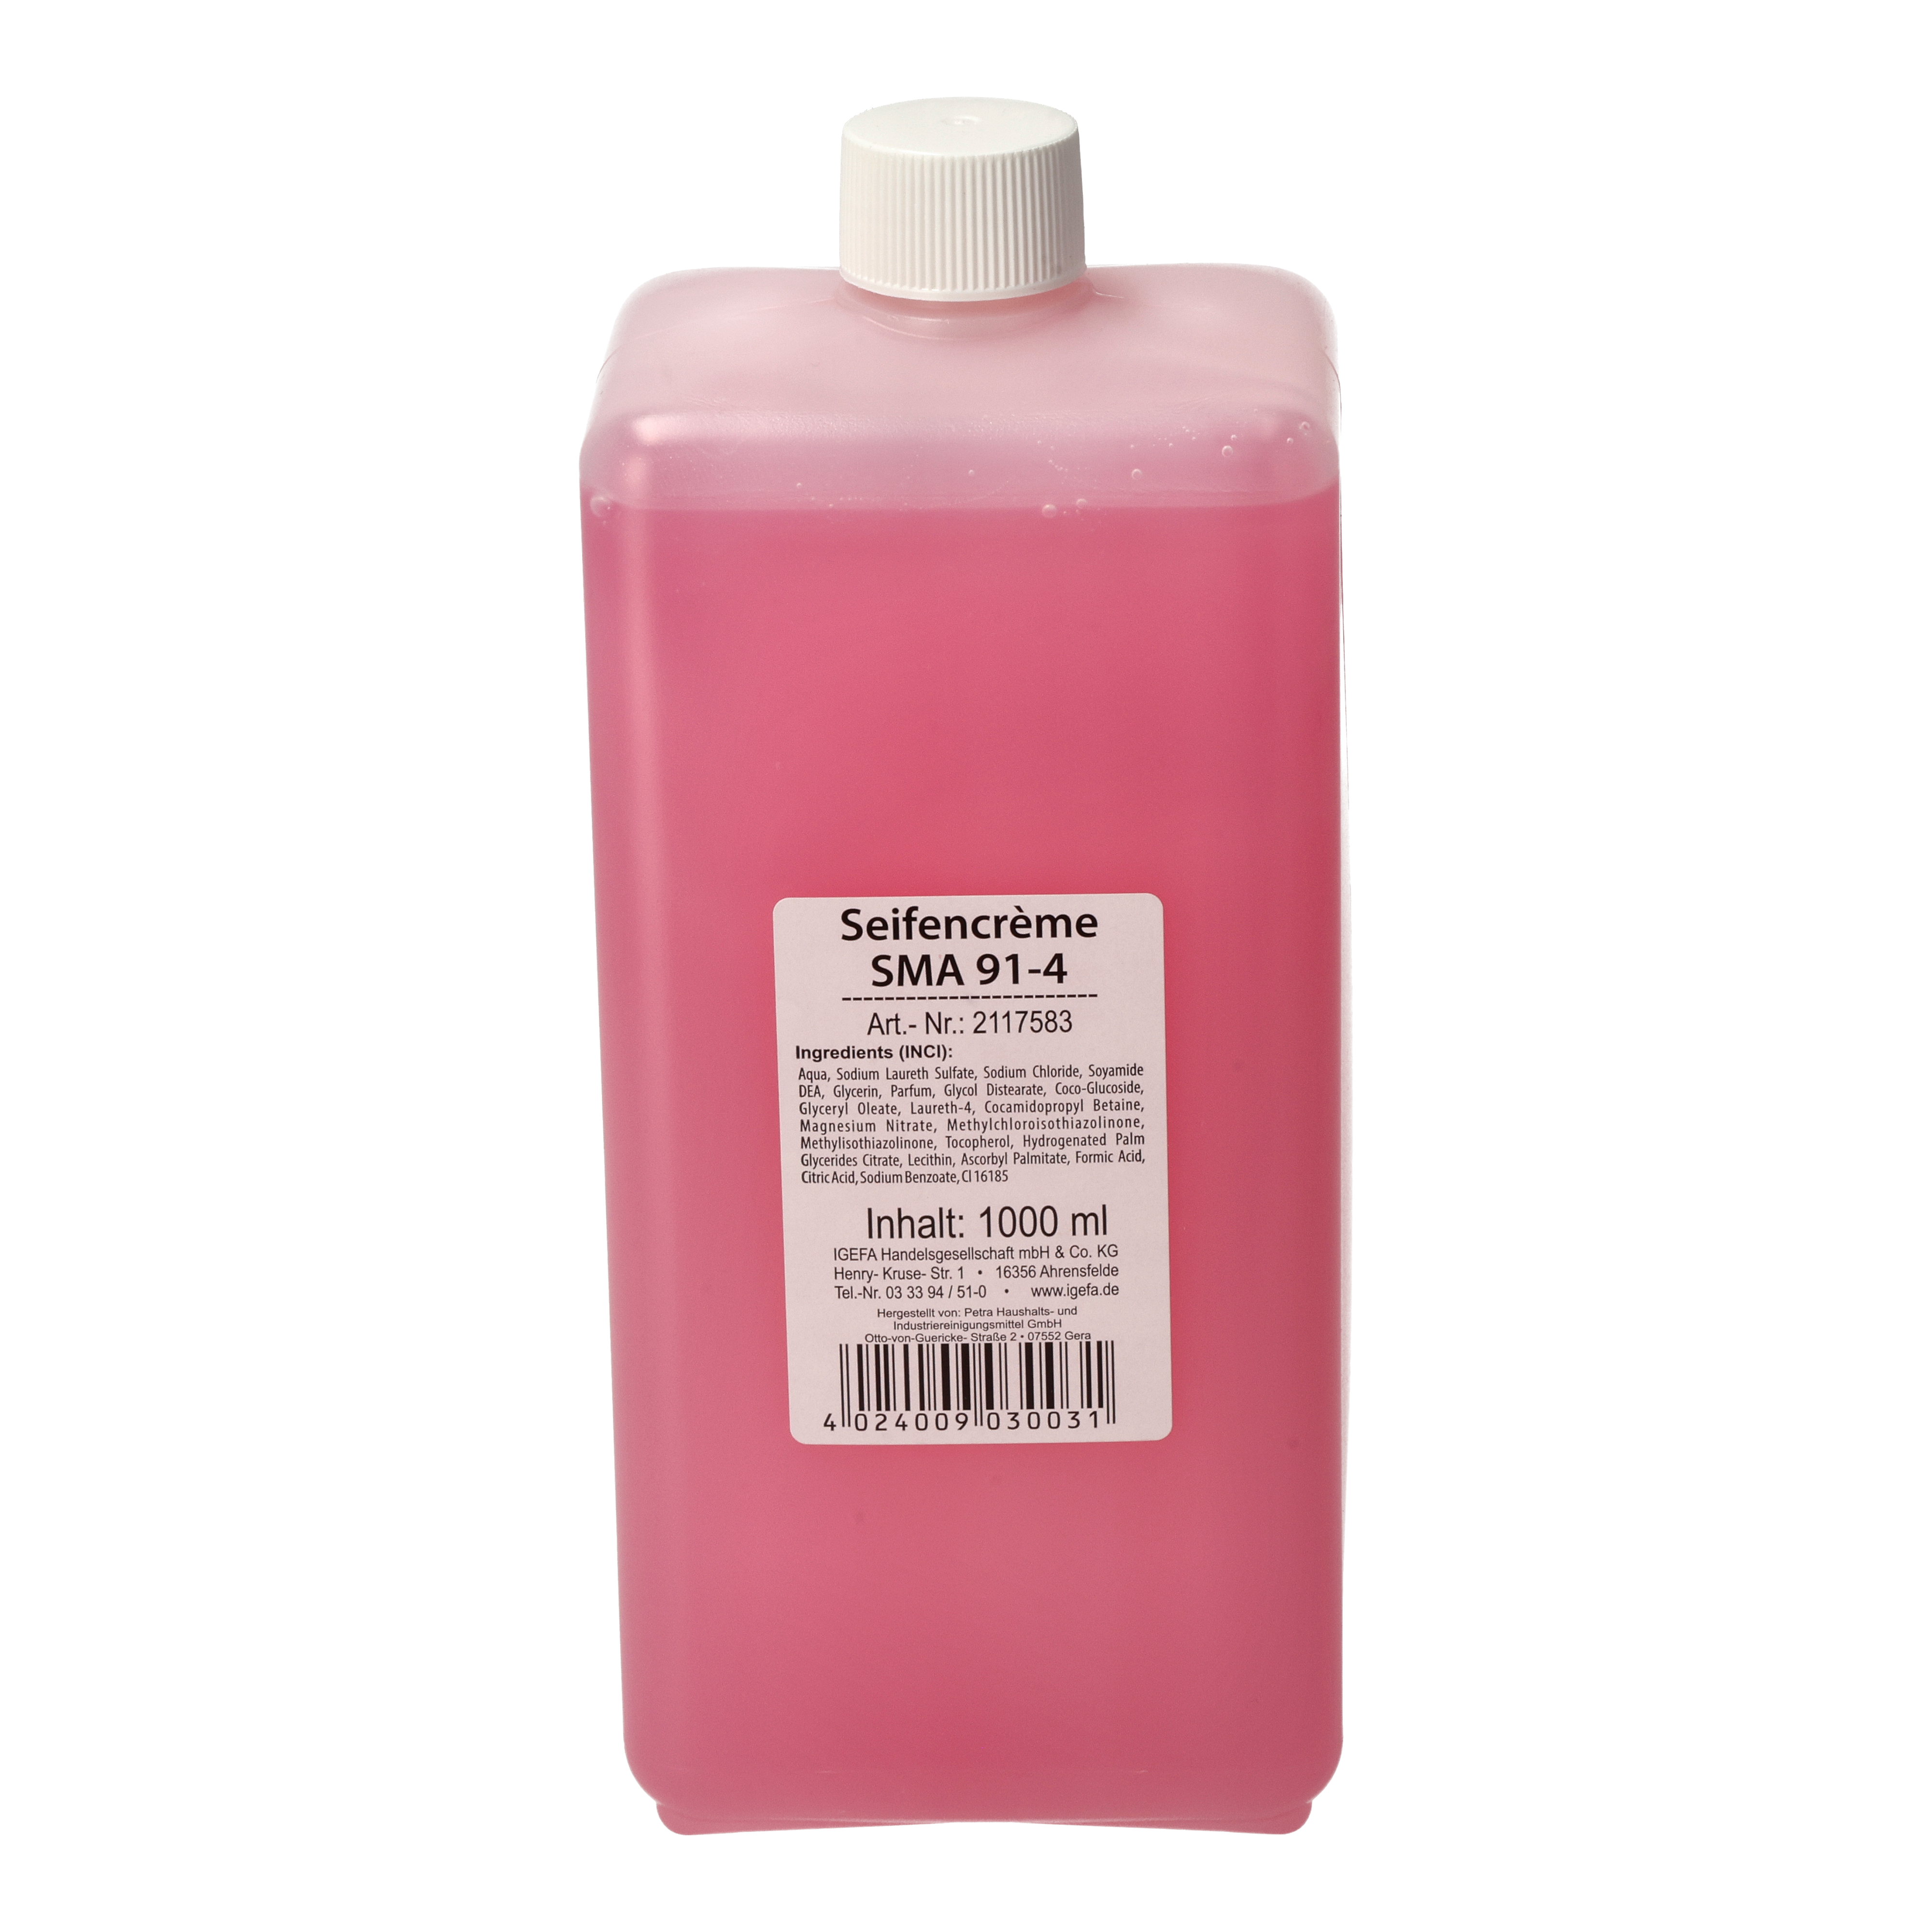 CLEAN and CLEVER SMART Seifencreme SMA91-4 - 6x1 Liter